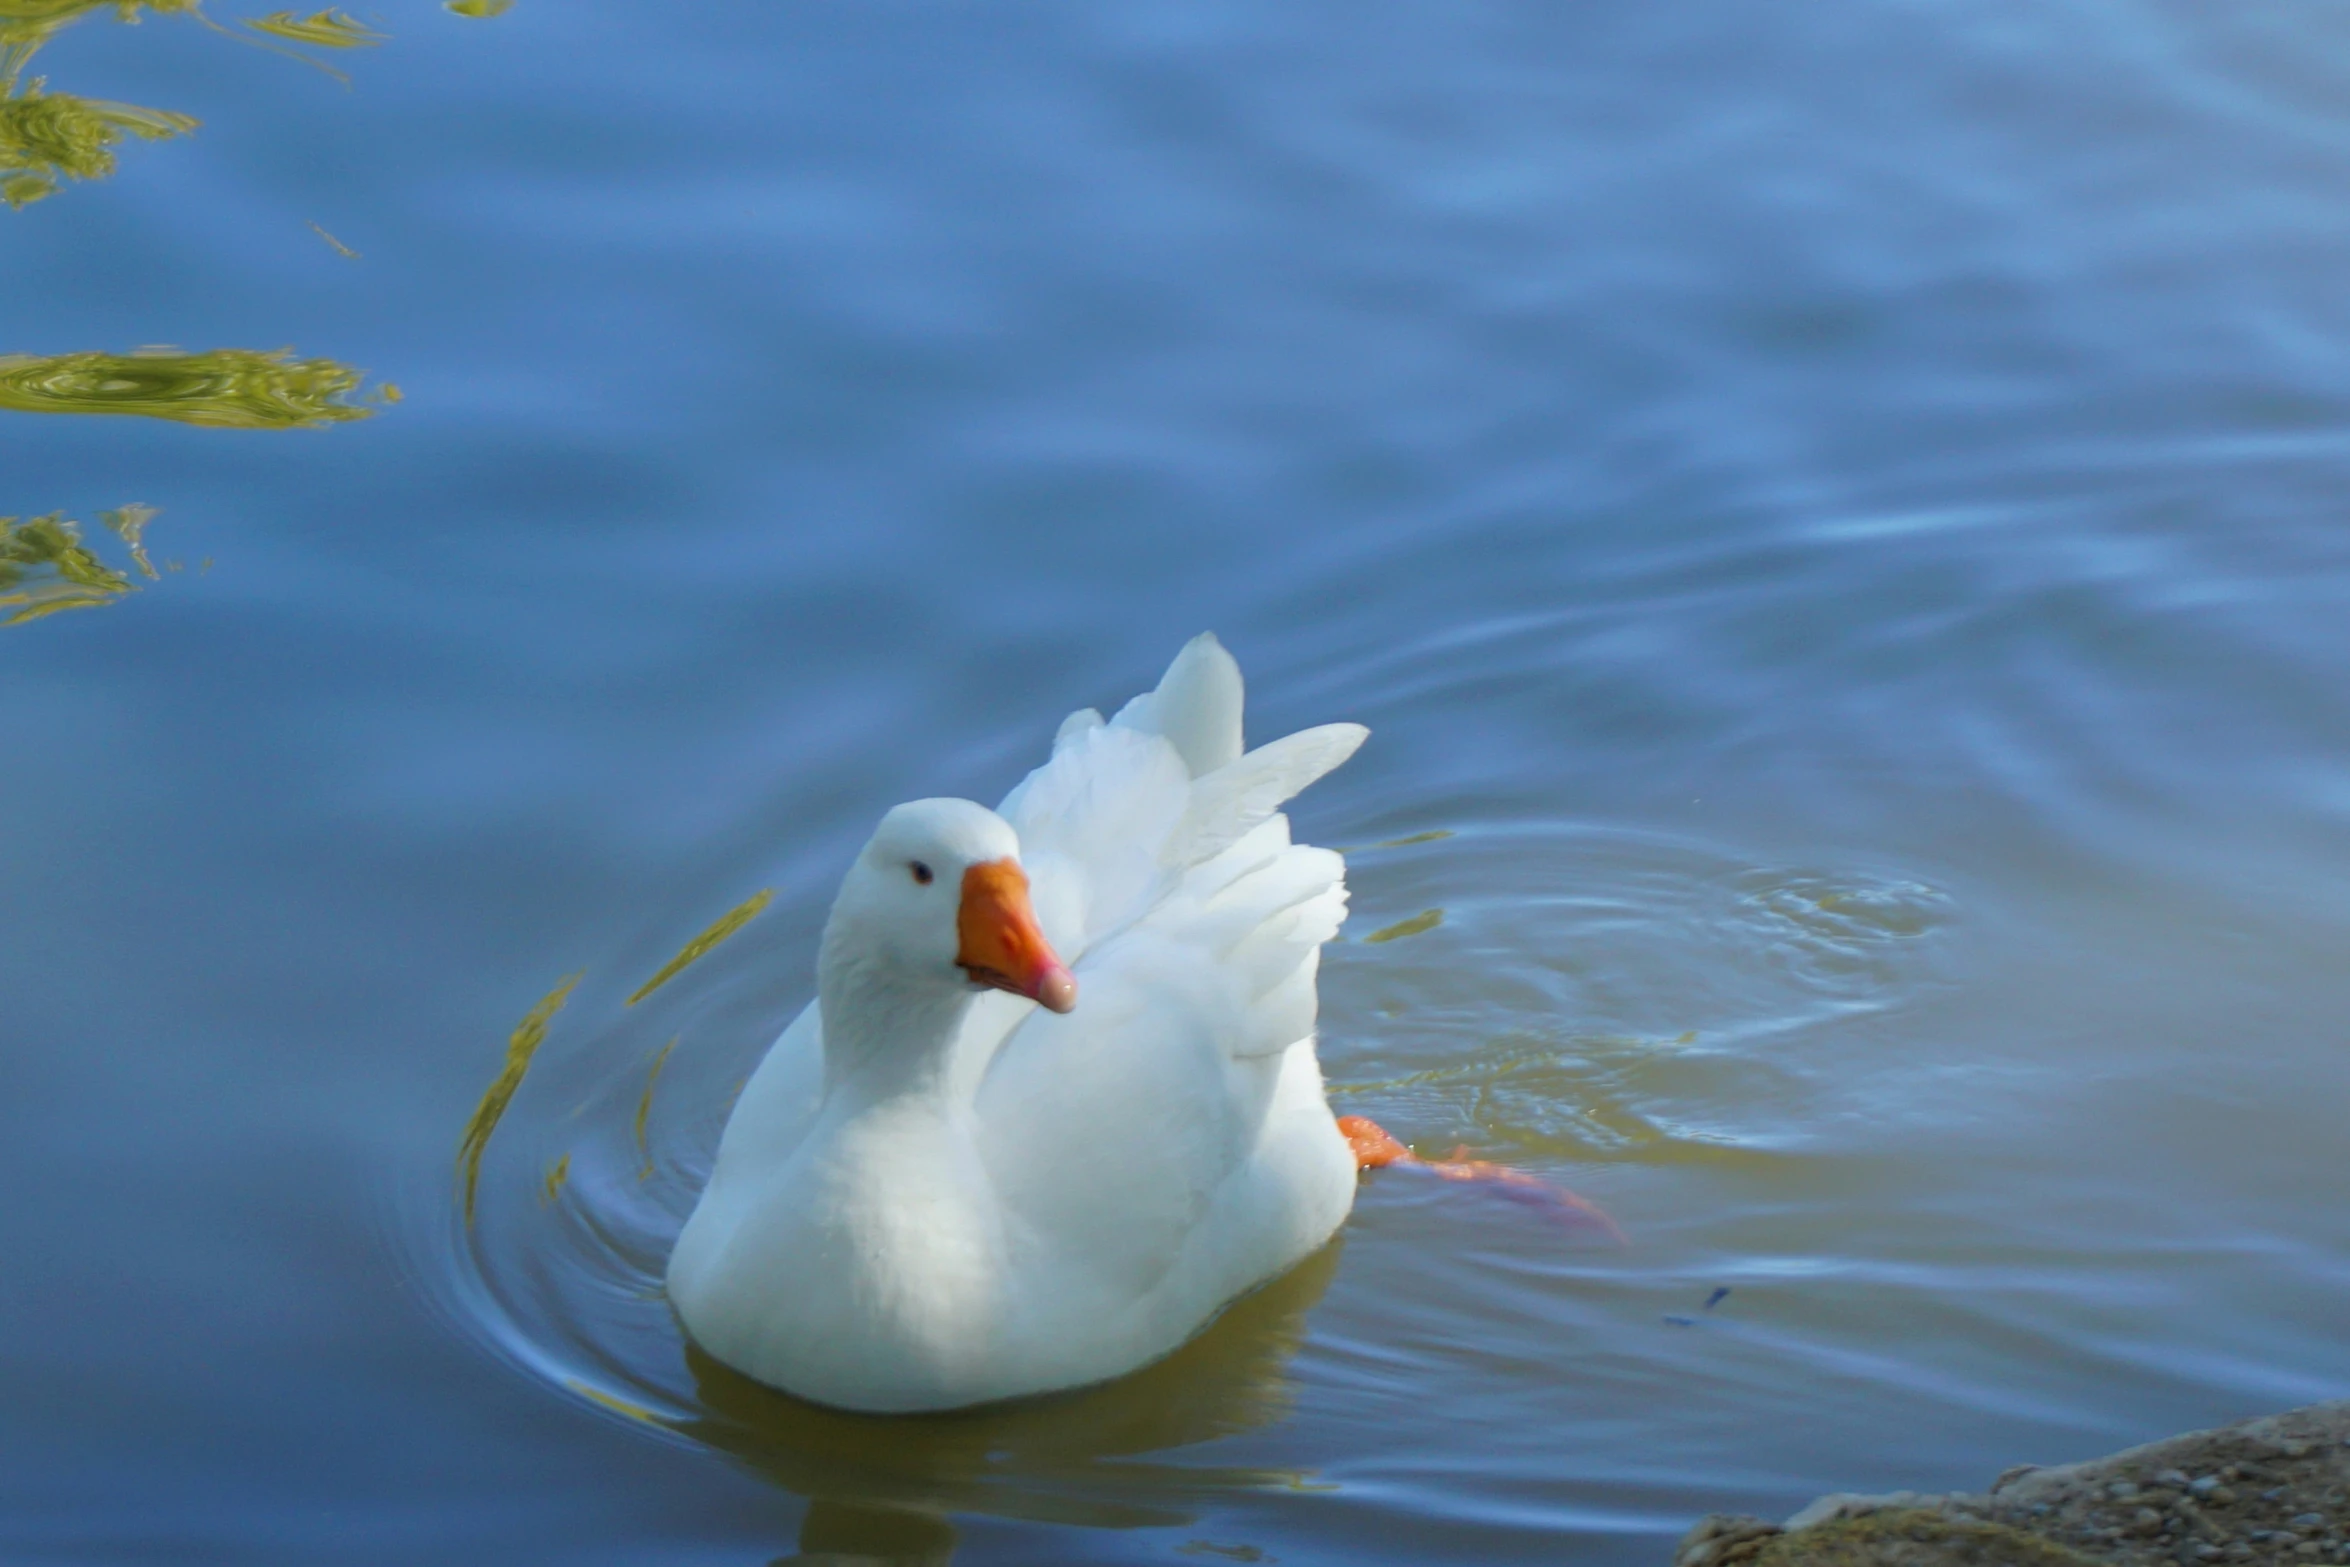 a duck floating on a lake with grass in the background